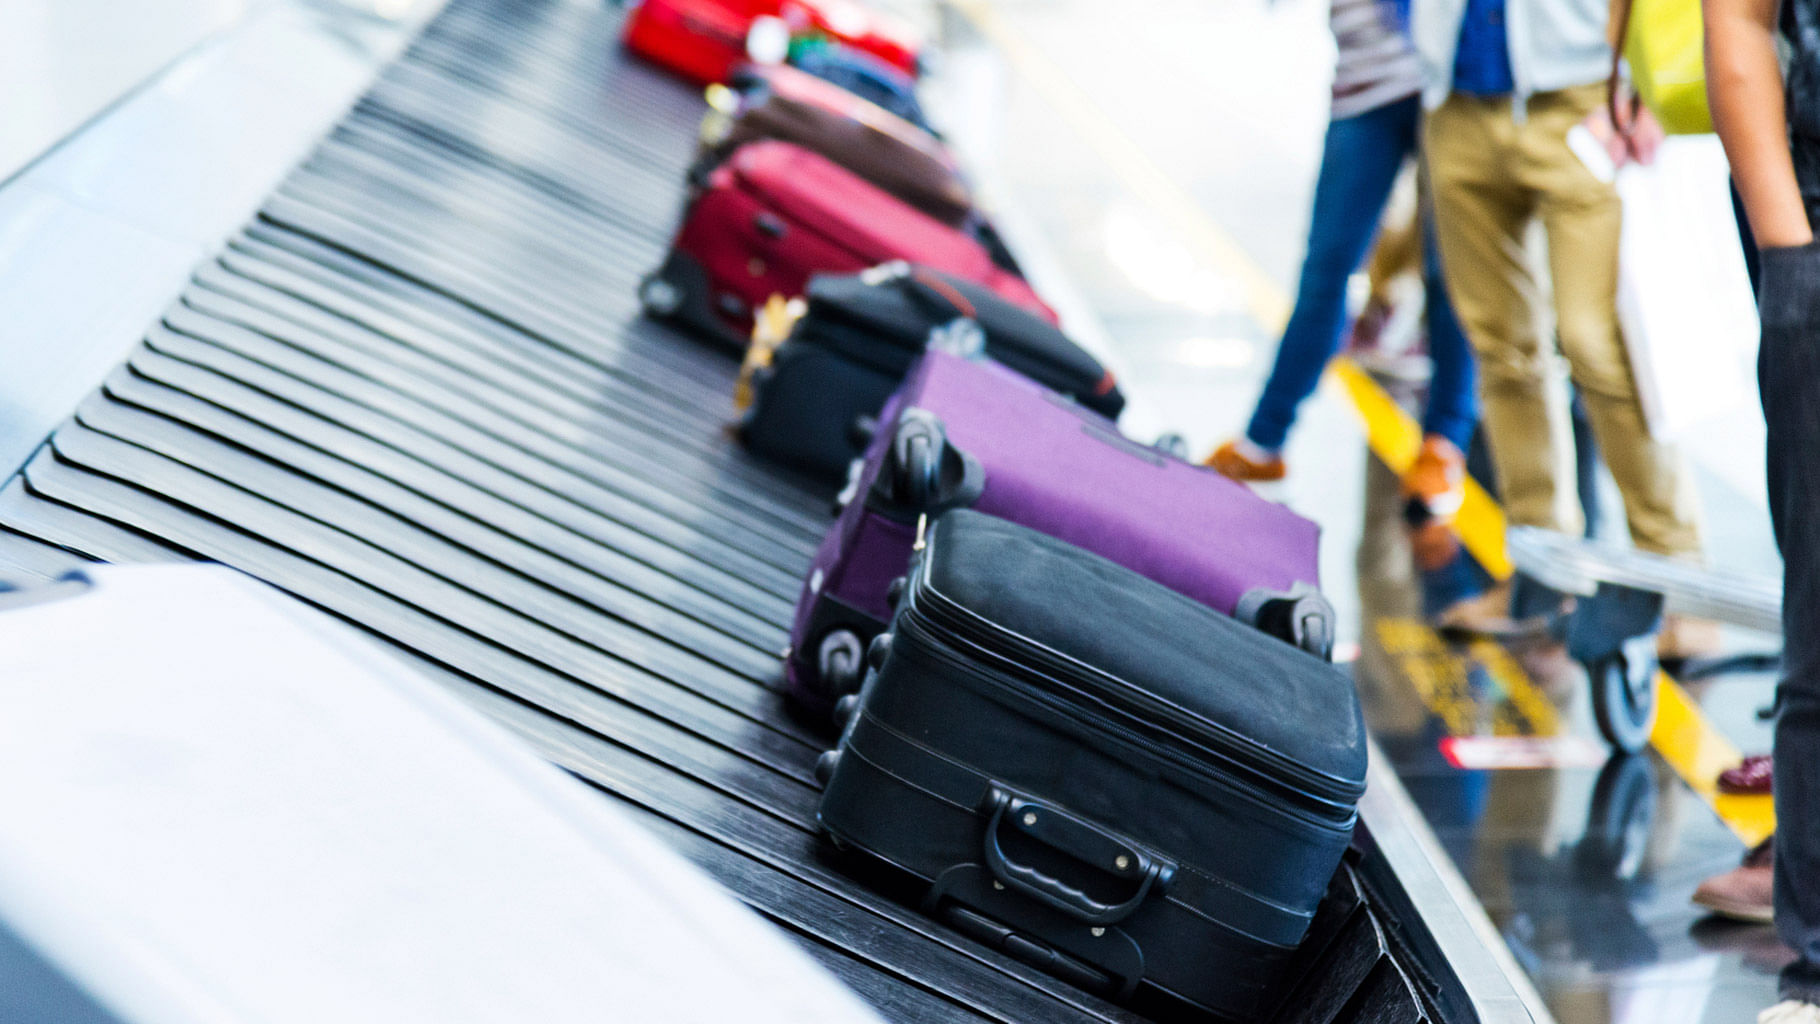 All domestic airlines allow free checked-in baggage up to 15 kg. (Photo: iStockphoto)